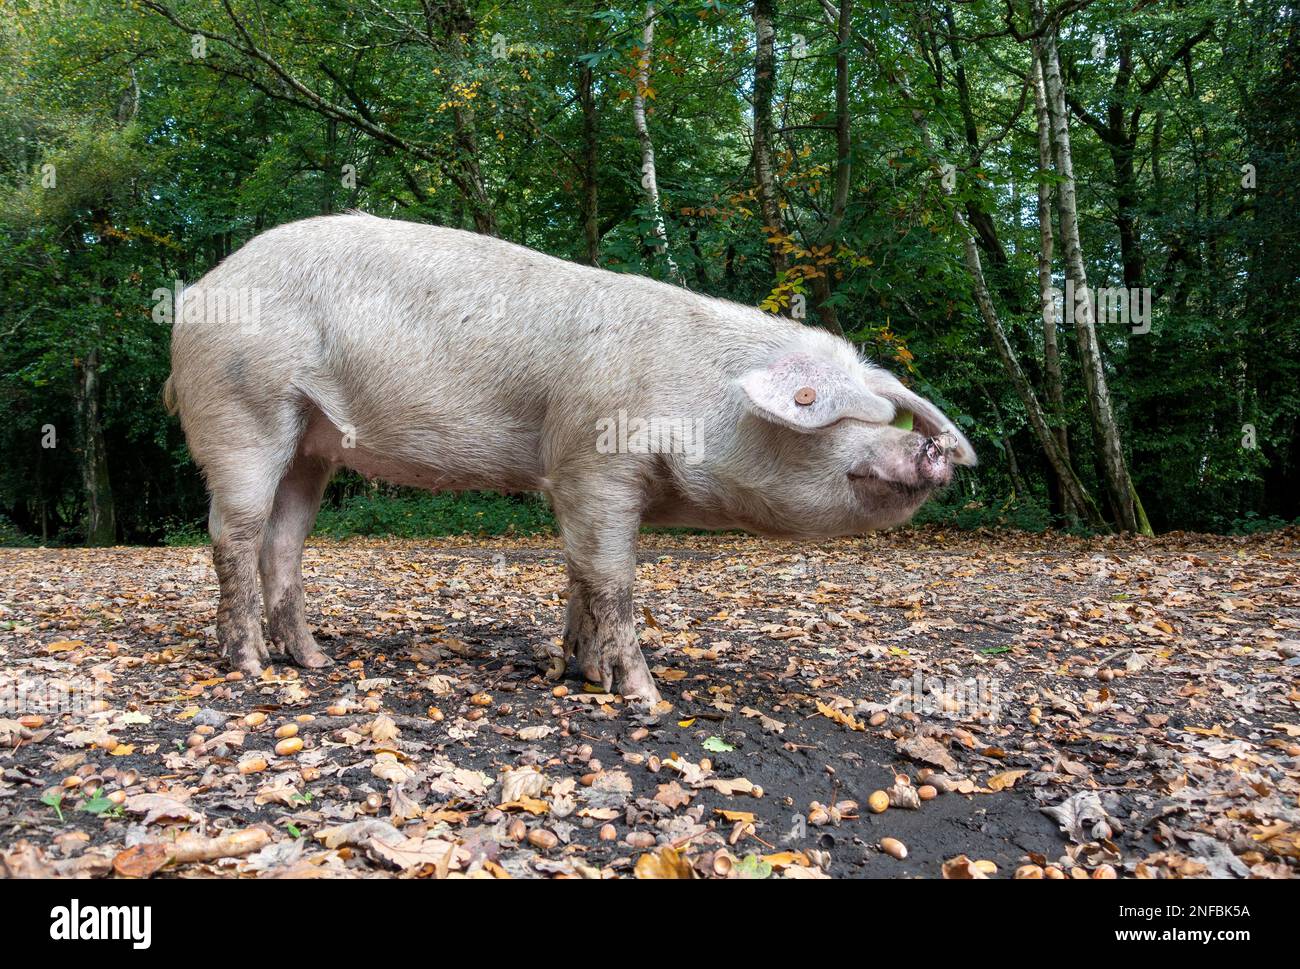 Pannage or Common Mast - Free roaming domestic pigs roam the New Forest in September when acorns and other nuts fall from the trees. Stock Photo